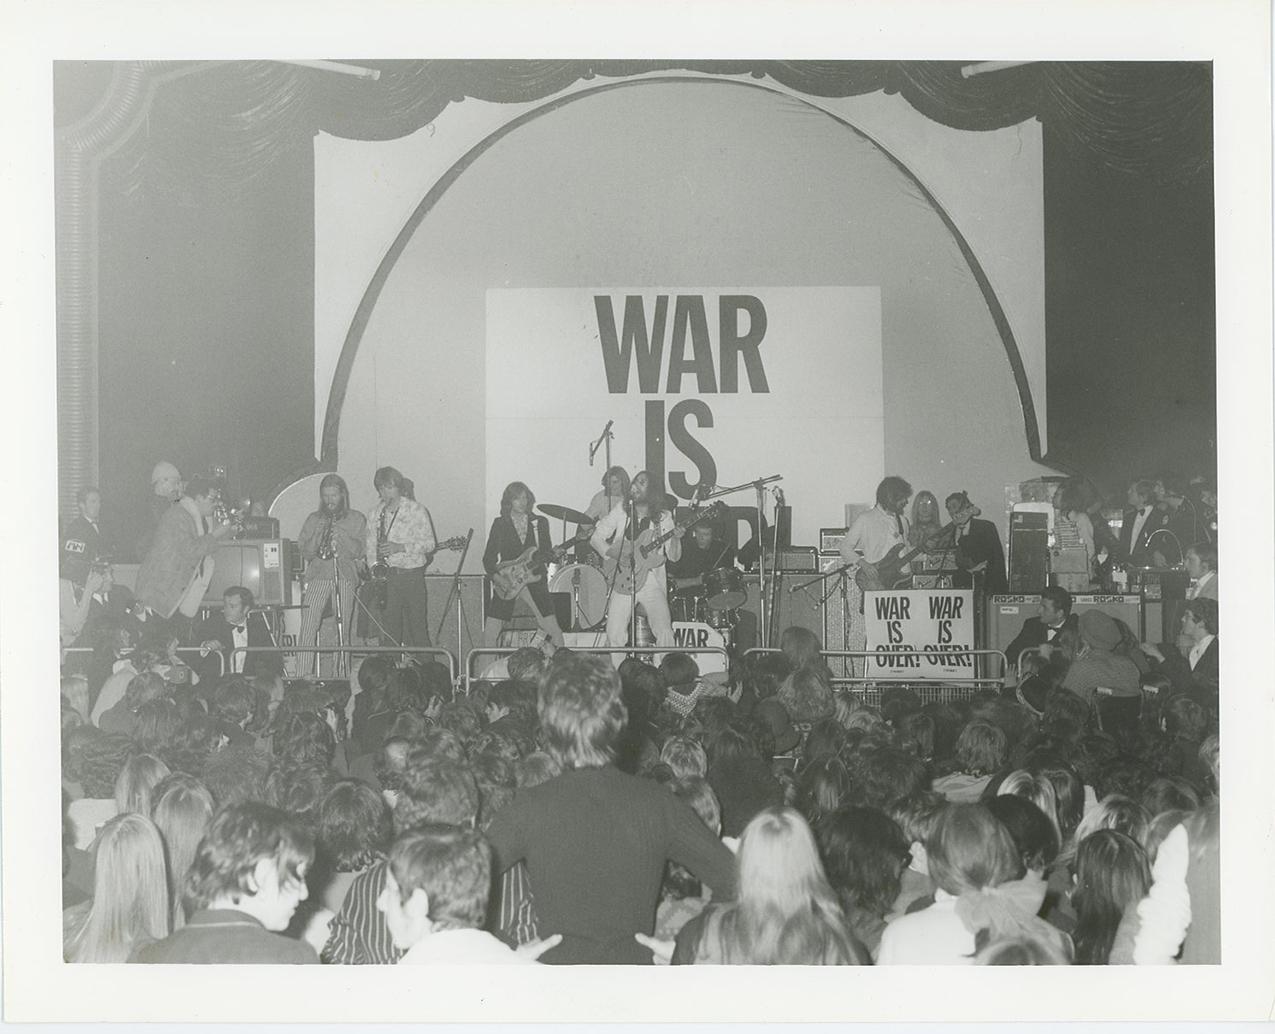 Unknown Black and White Photograph - Plastic Ono Band "Peace for Christmas" Concert 1969